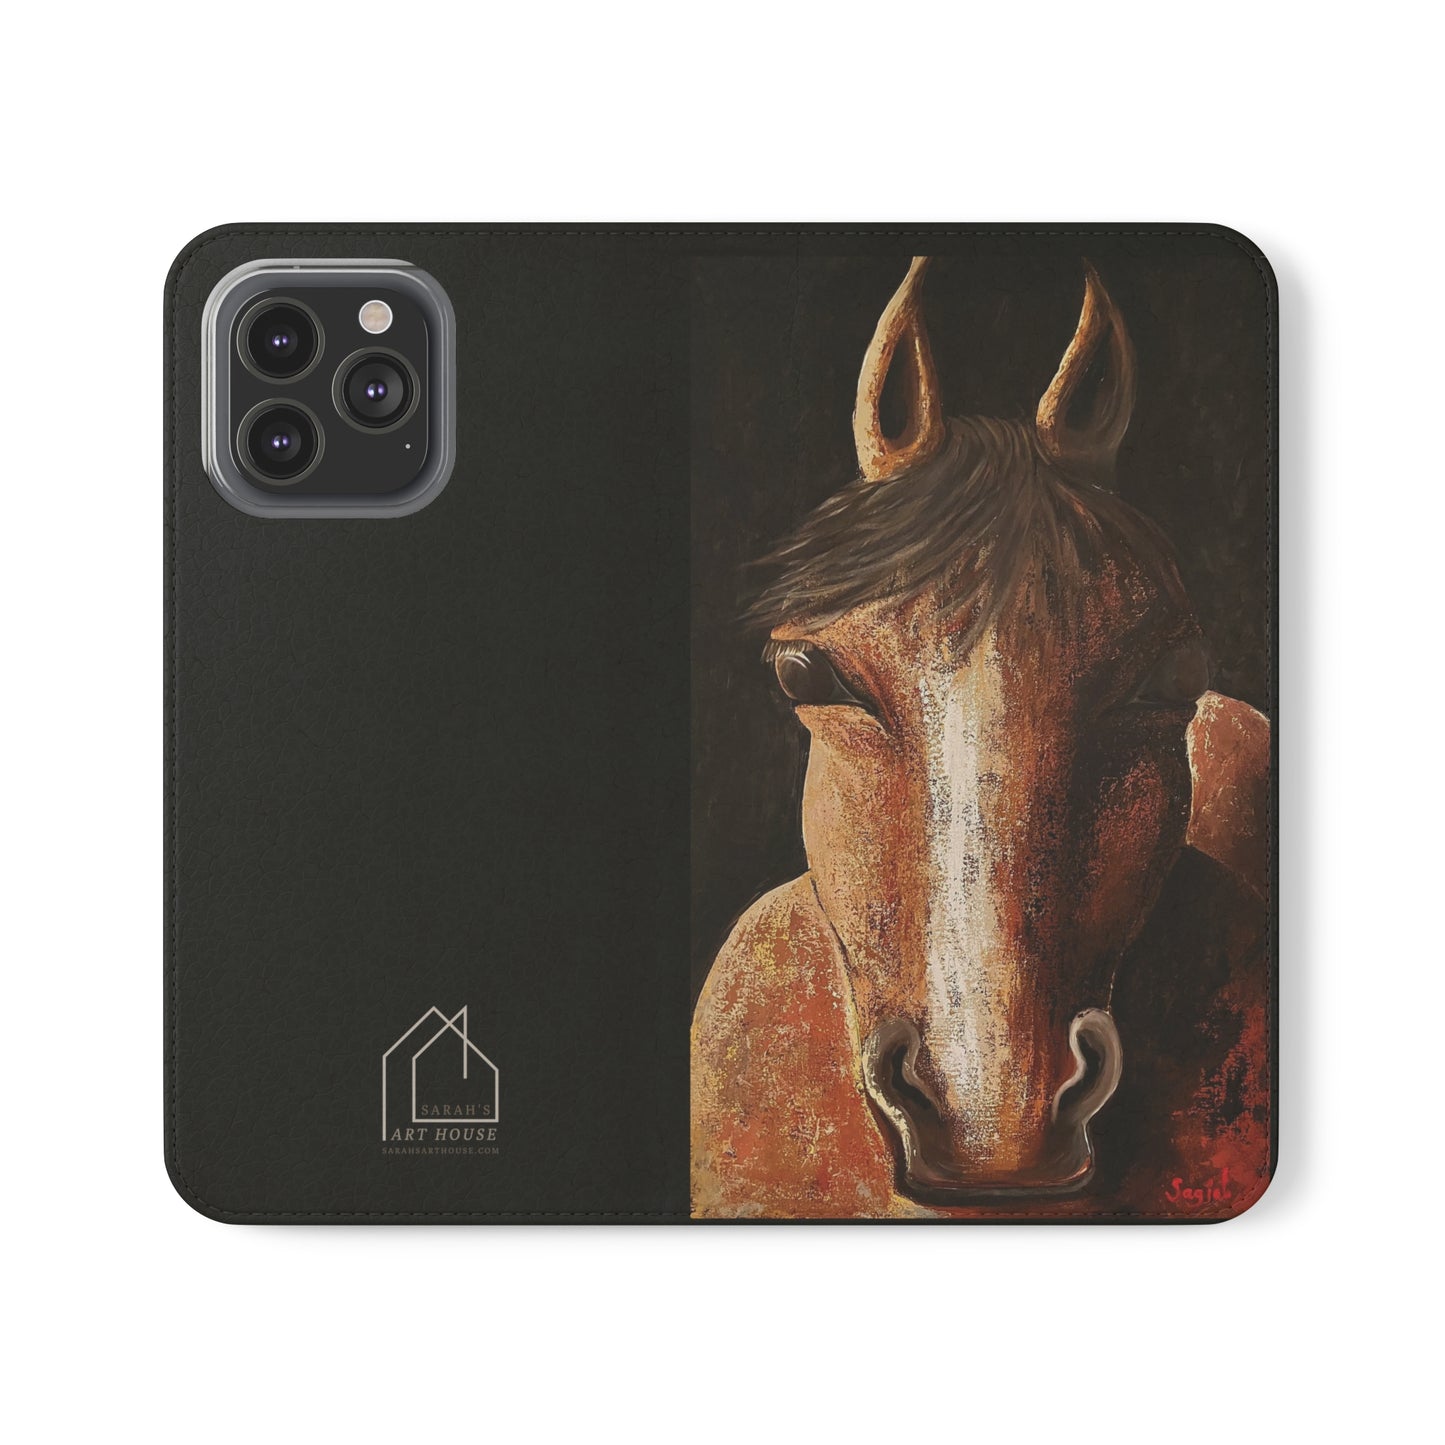 Phone Flip Cases - Wallet Phone case - Phone case with Wallet - Equestrian - Nigel